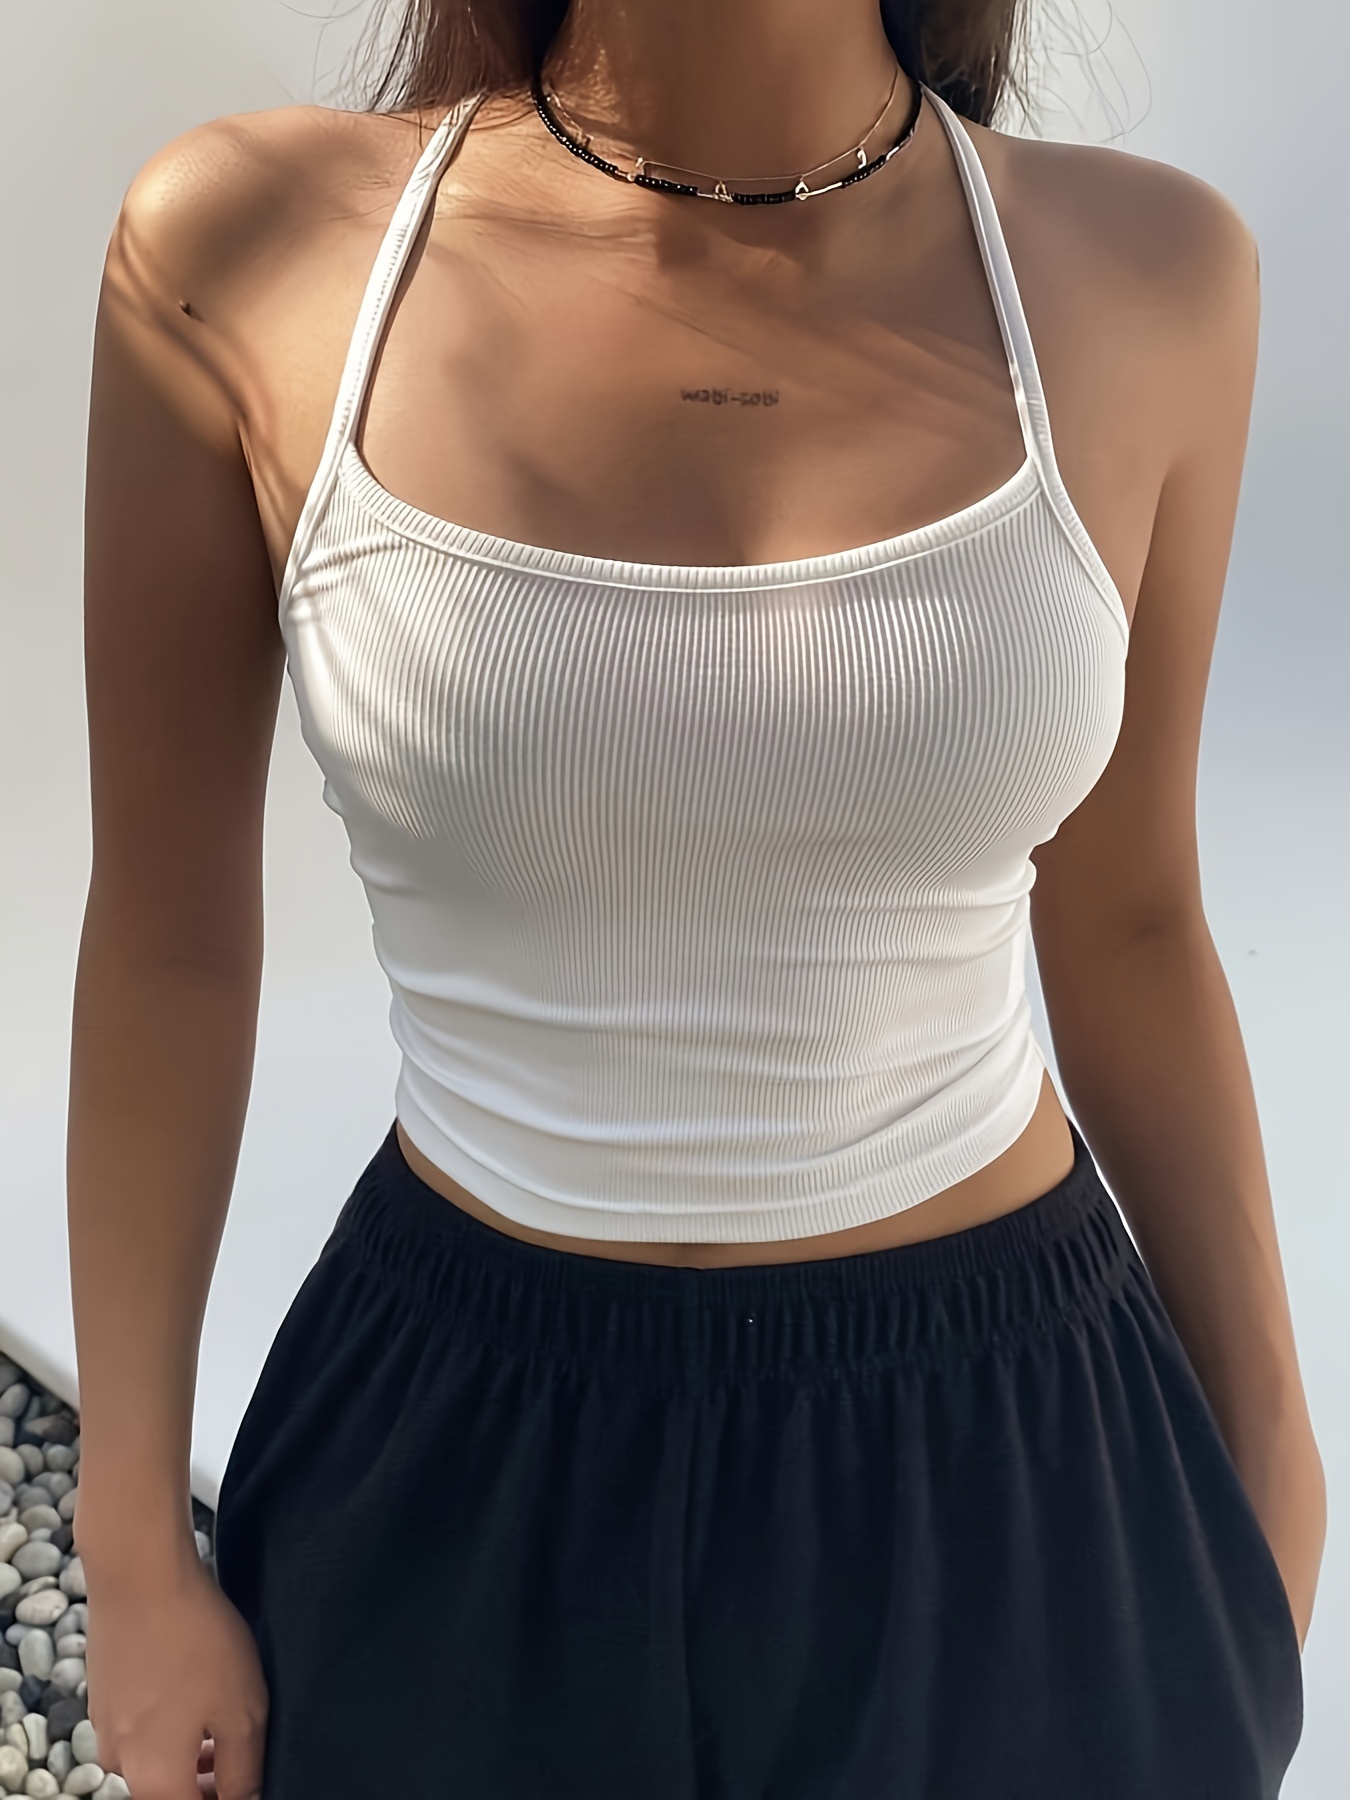 White Tank Tops Women Built in Bra Women's Solid Color with Chest